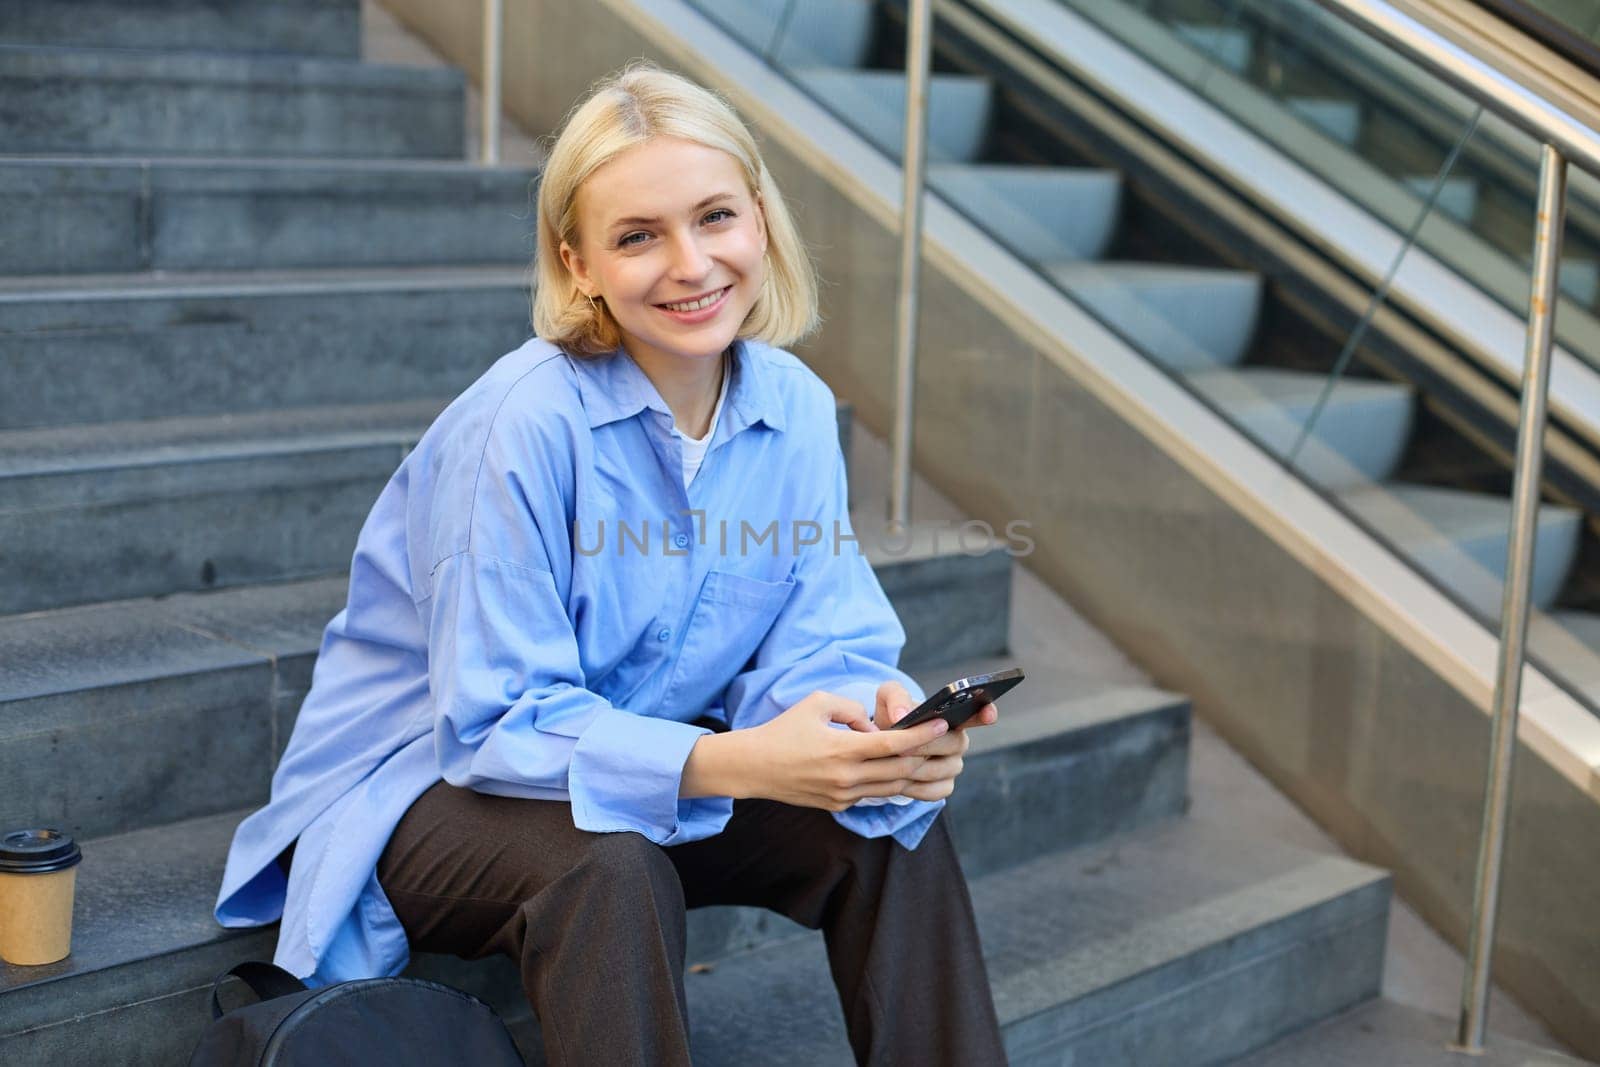 Lifestyle portrait of young urban female model, student drinks cup of takeaway coffee, sitting on stairs outdoors, using mobile phone, smiling and looking happy while taking a break.